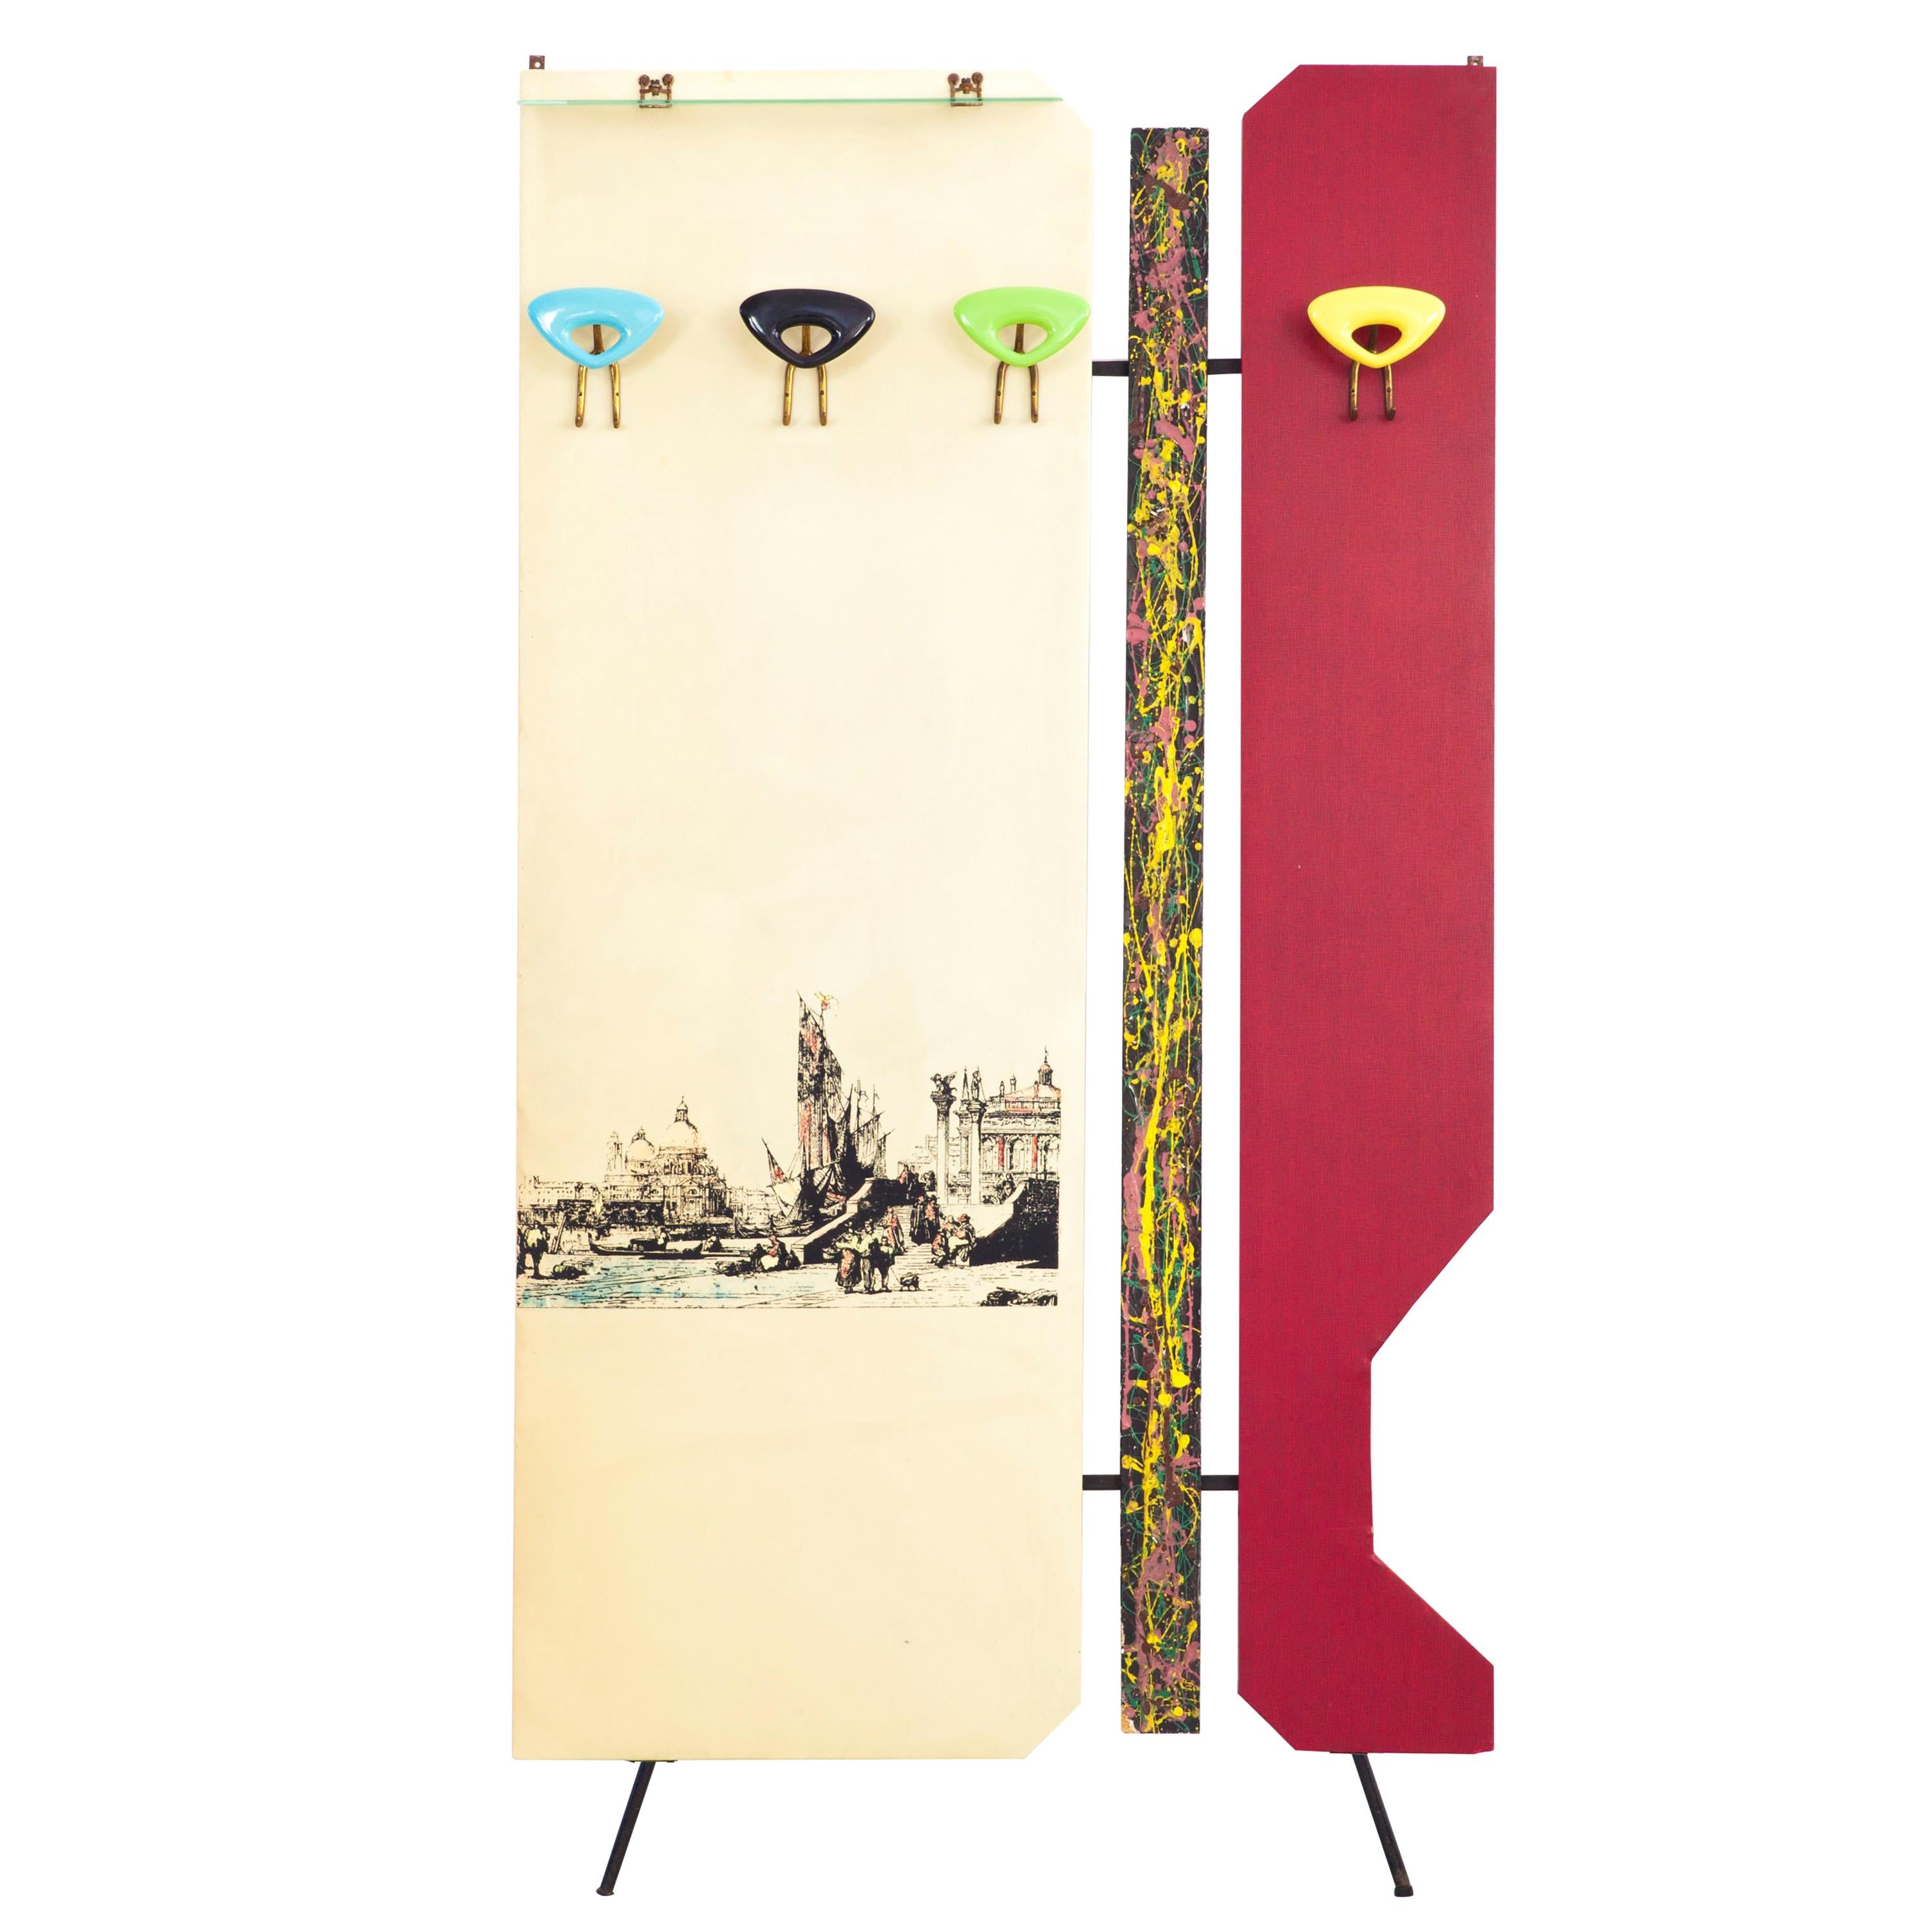 Italian Multicolored Wardrobe with "Venice" Print and Abstract Paintings, 1950s